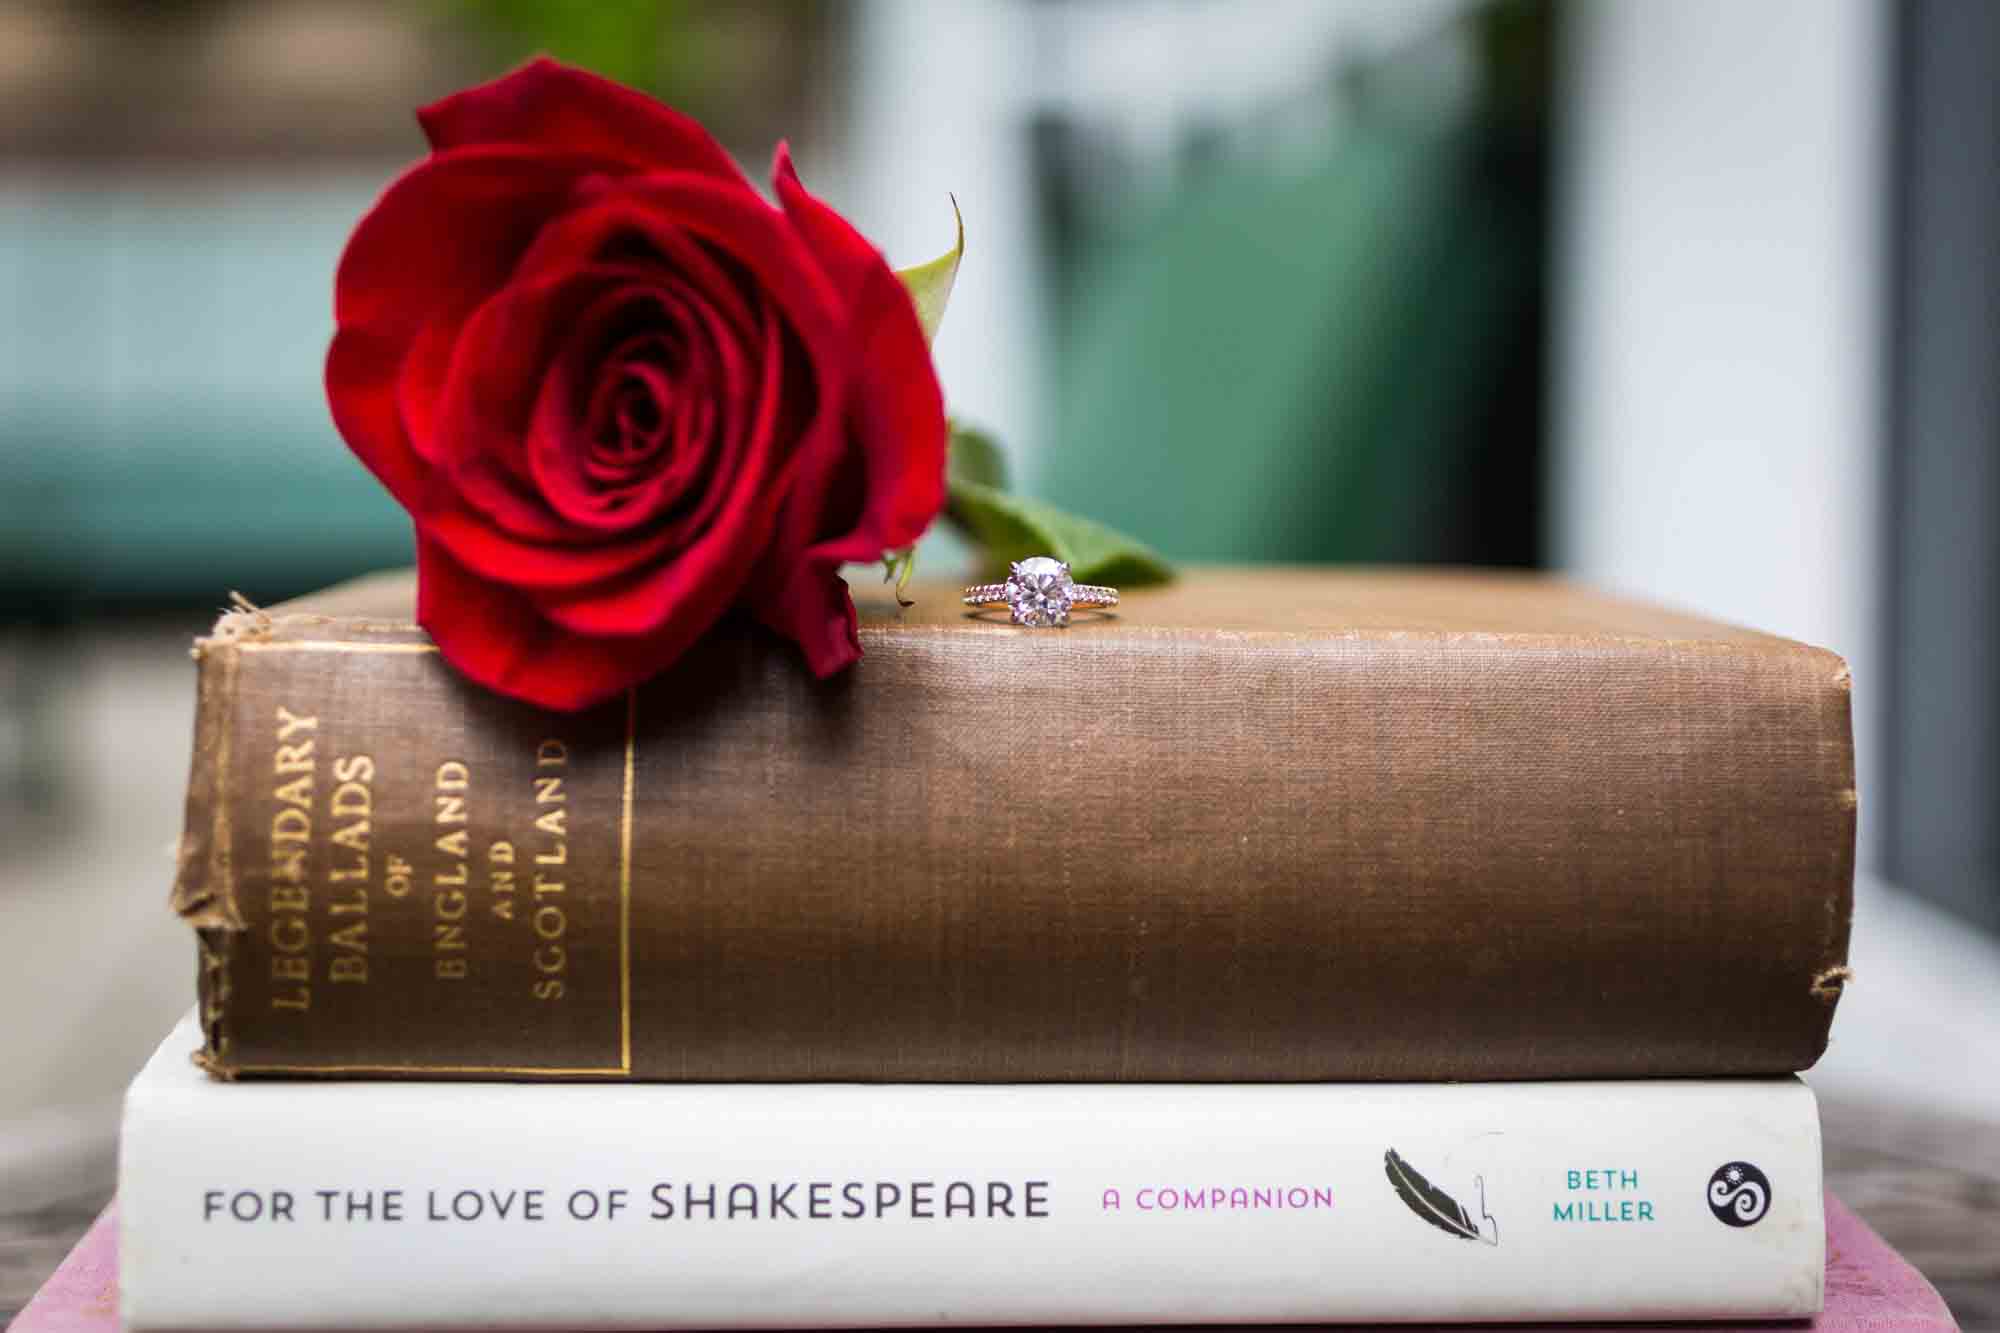 Engagement ring on top of books with red rose flower